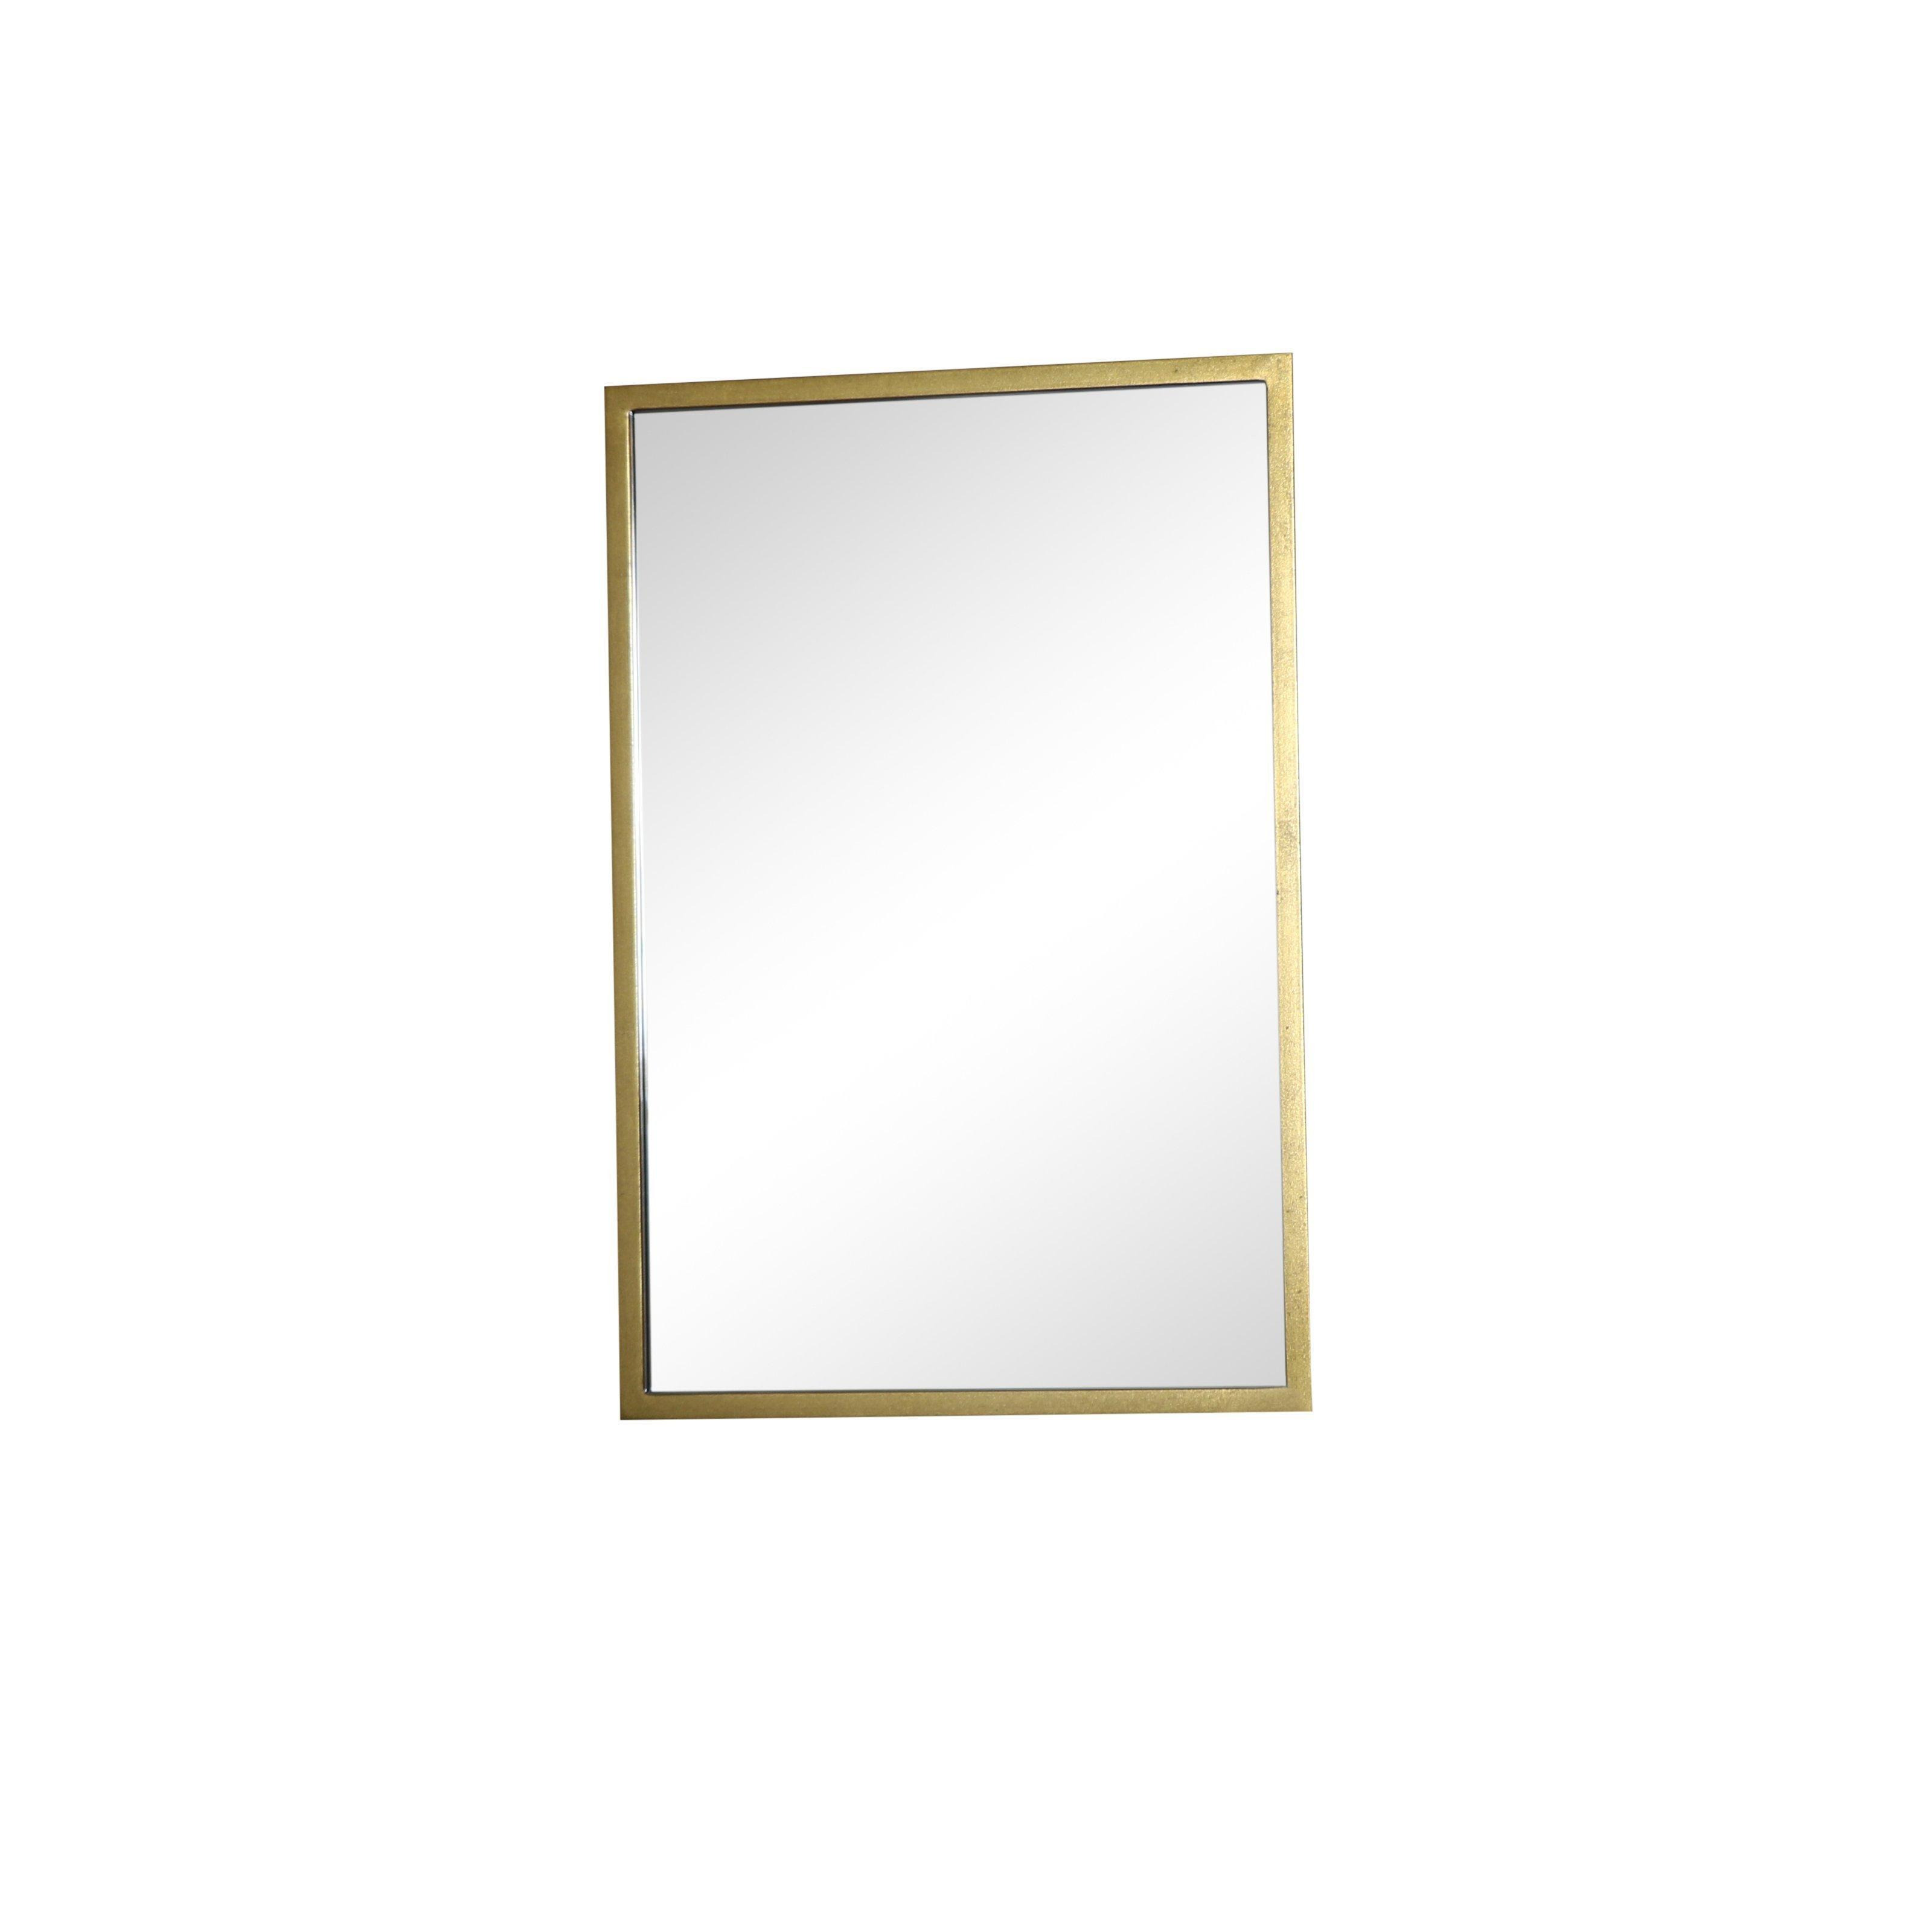 Rustic Antique Gold Rectangle Wall Mirror 50cm X 75cm - image 1